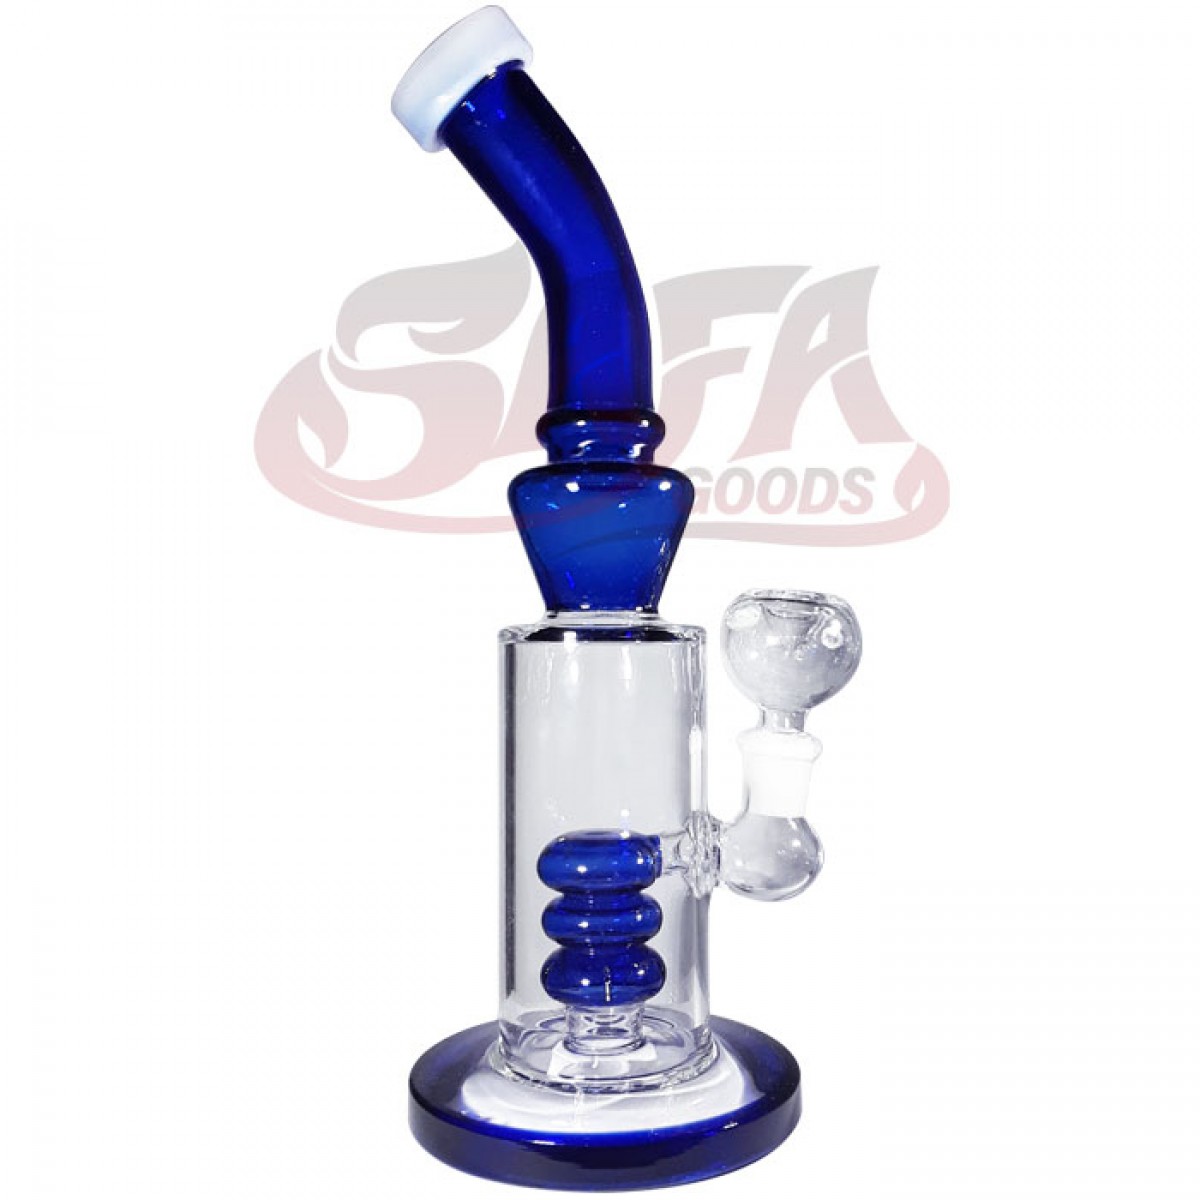 10 Inch Banger Hanger Water Pipes - Two Tone/Showerhead